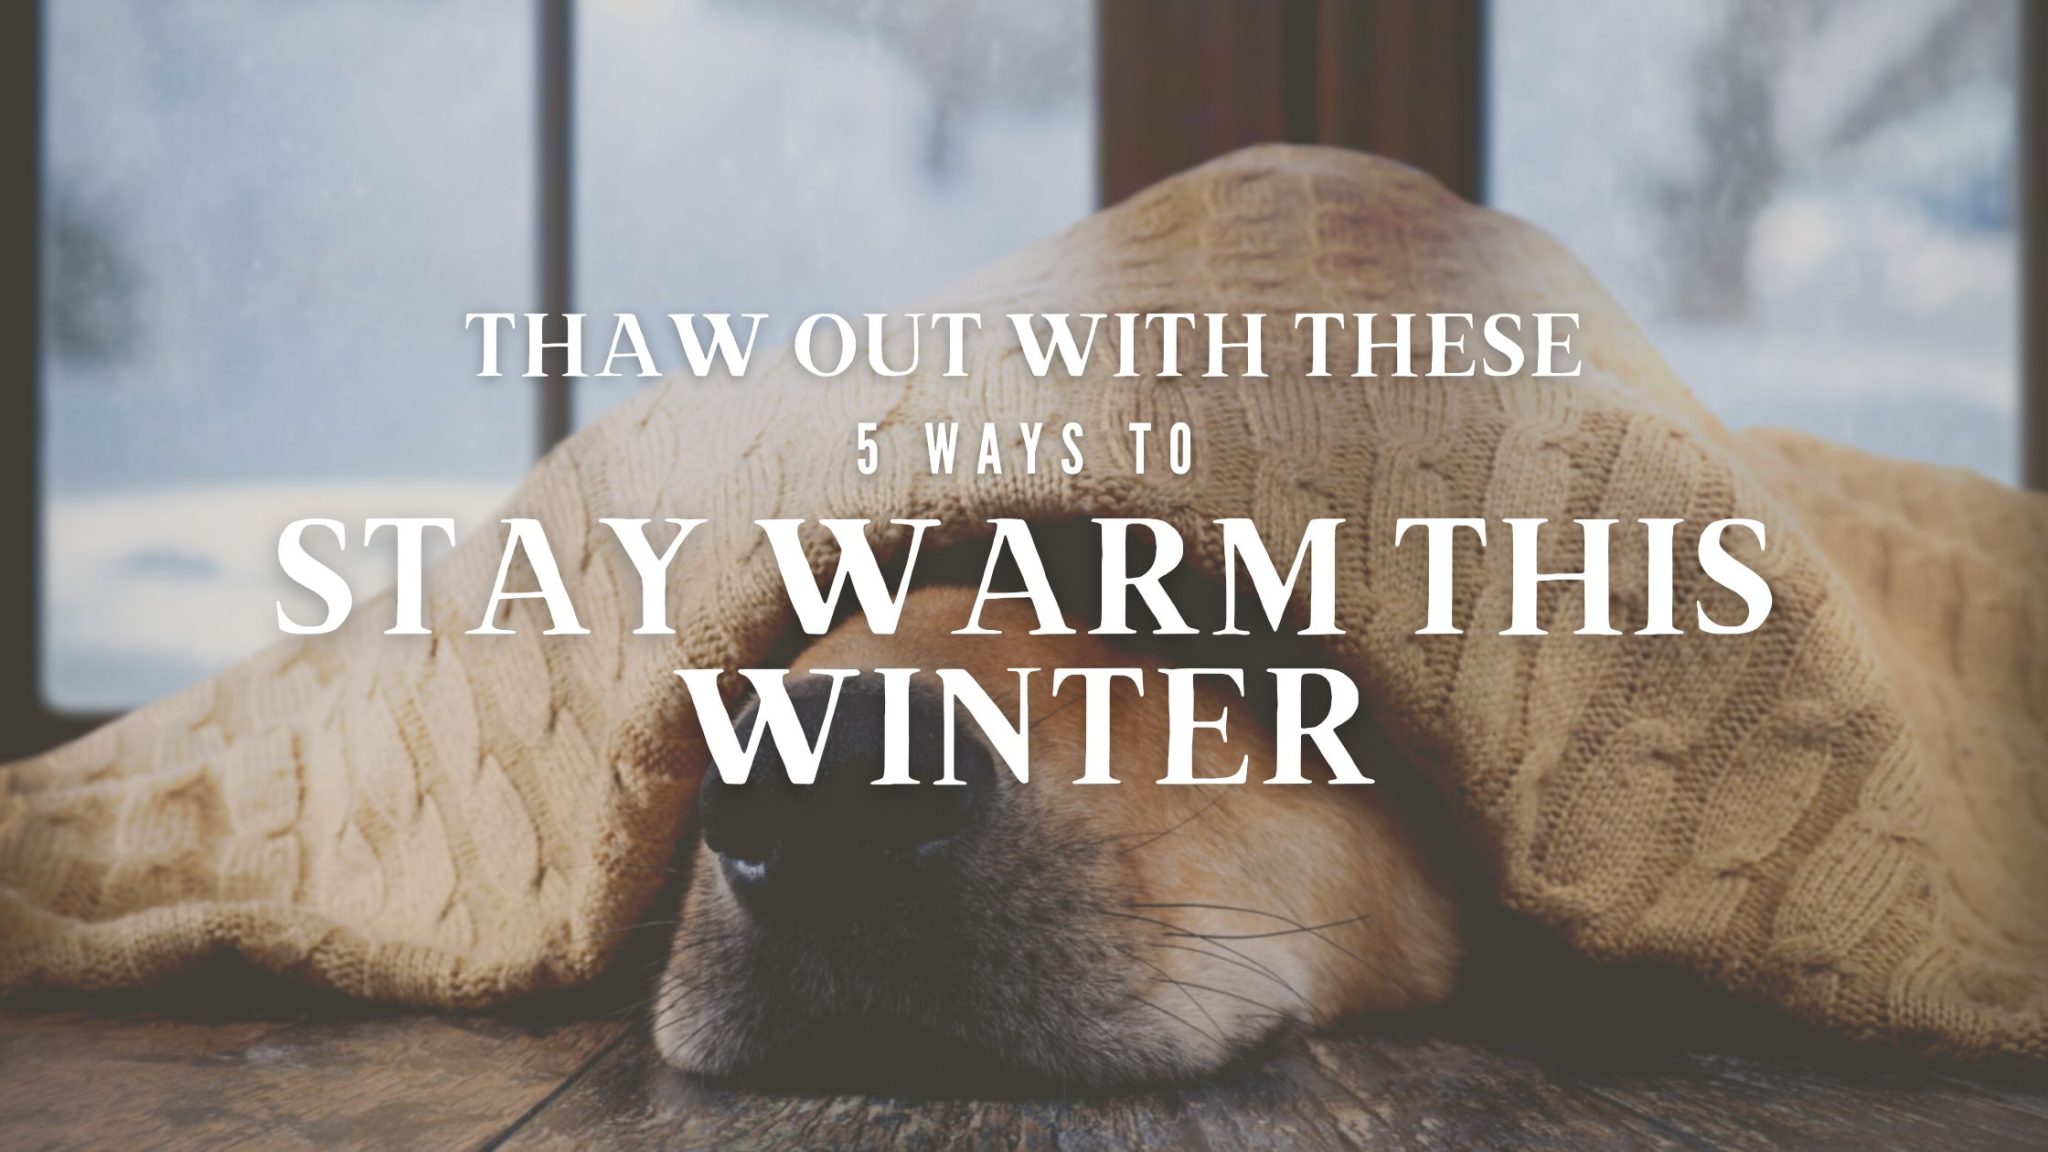 Thaw Out With These 5 Ways to Stay Warm This Winter